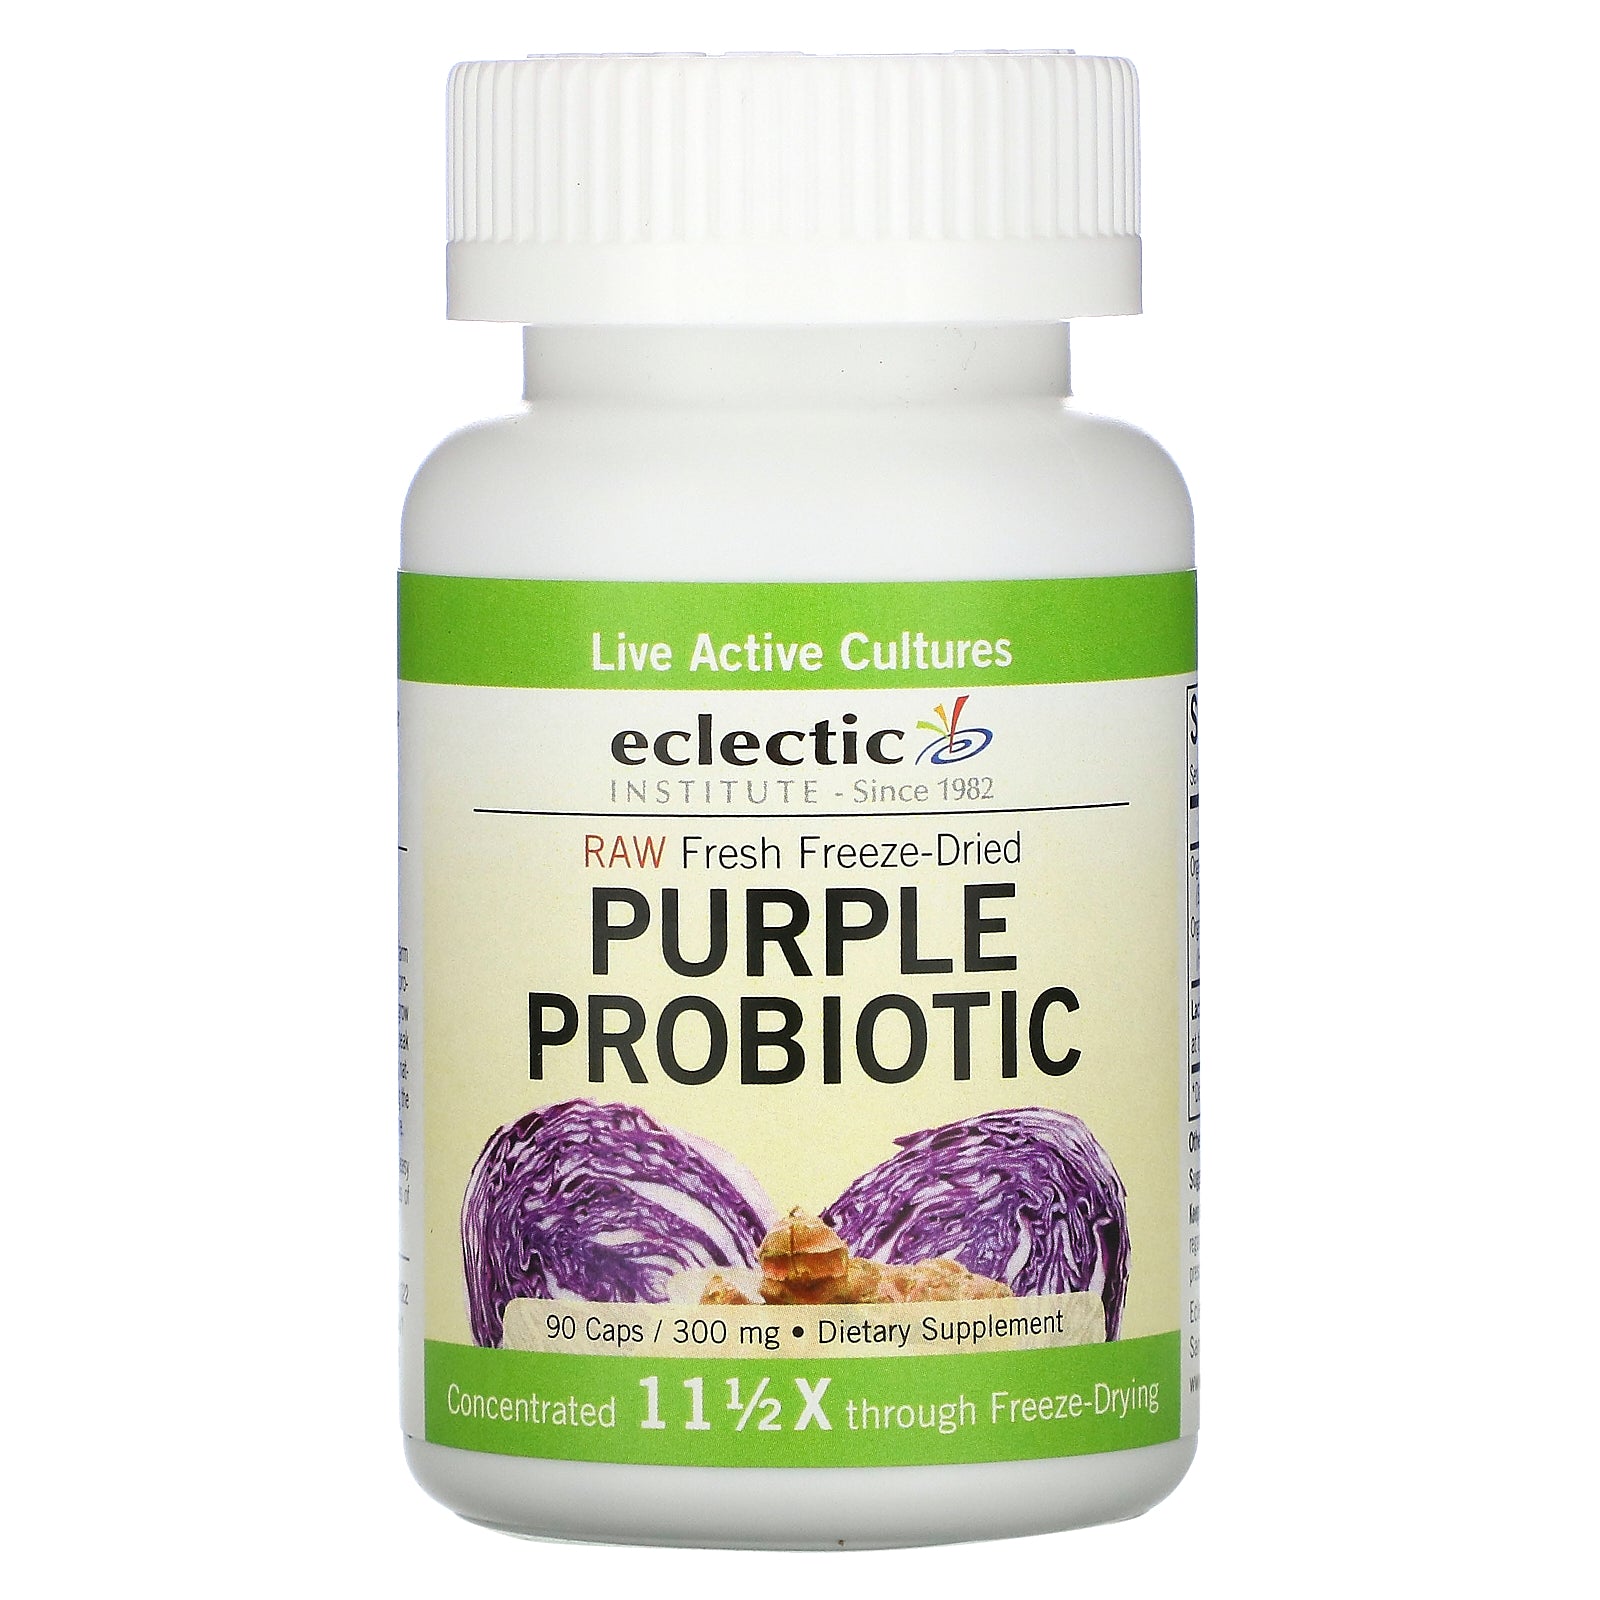 Eclectic Institute, Raw Fresh Freeze-Dried, Purple Probiotic, 300 mg, 90 Caps